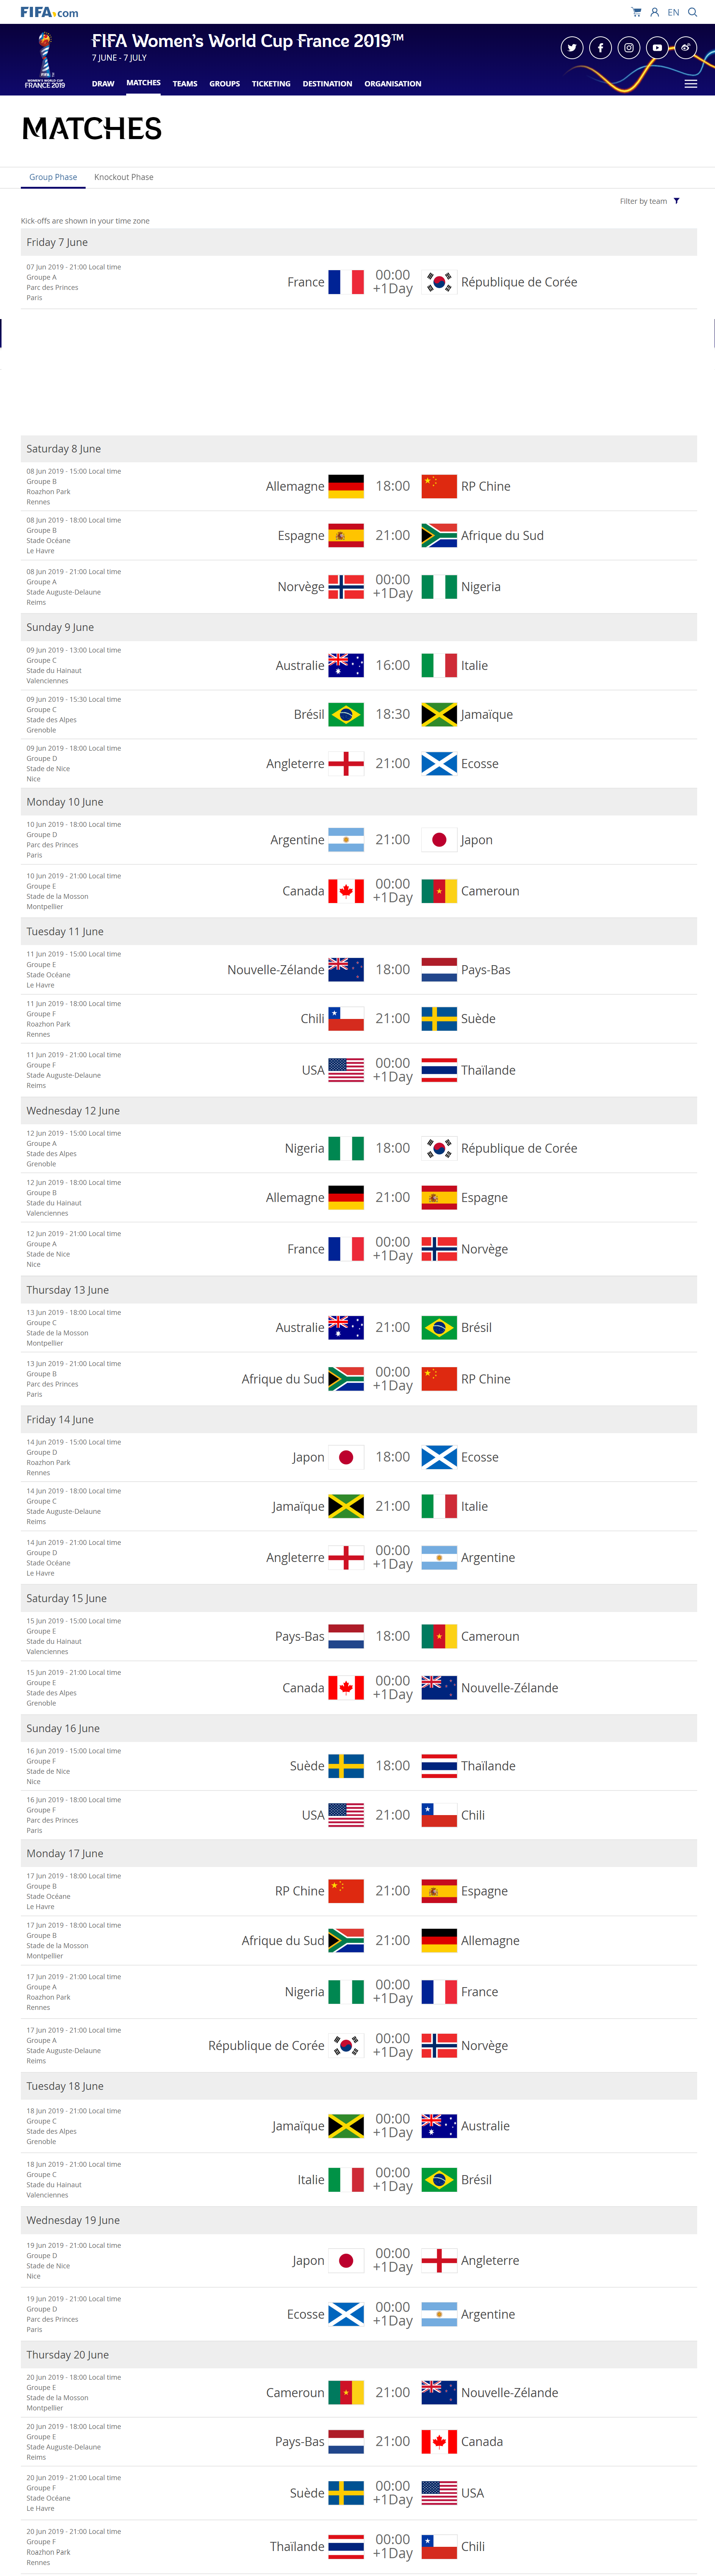 FIFA Women's World Cup Schedule In France 2022